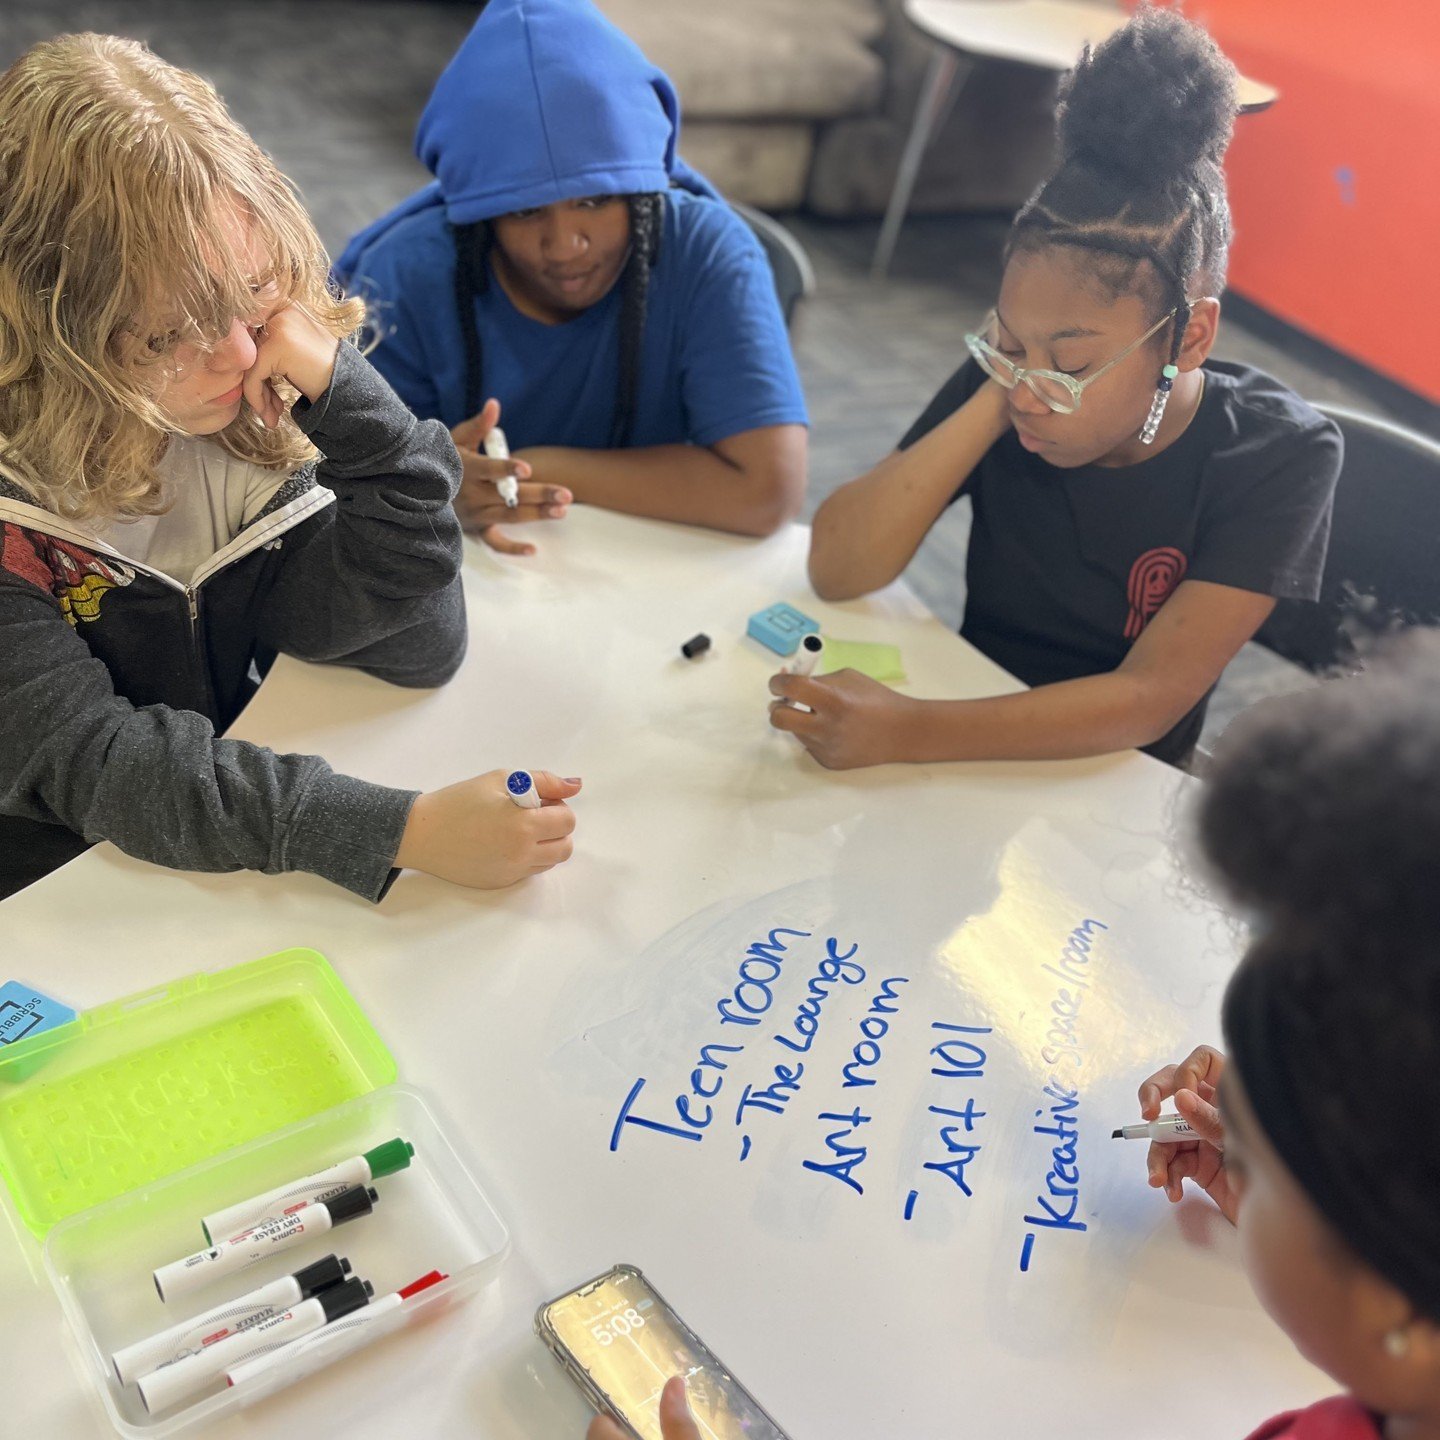 At The Table, our creative programming hub at our Southside location, members planned their summer and brainstormed new room names. Stay tuned for the big reveal! #youthleadership #youthactivities #greatfuturesstarthere #BGCMR  #thetable